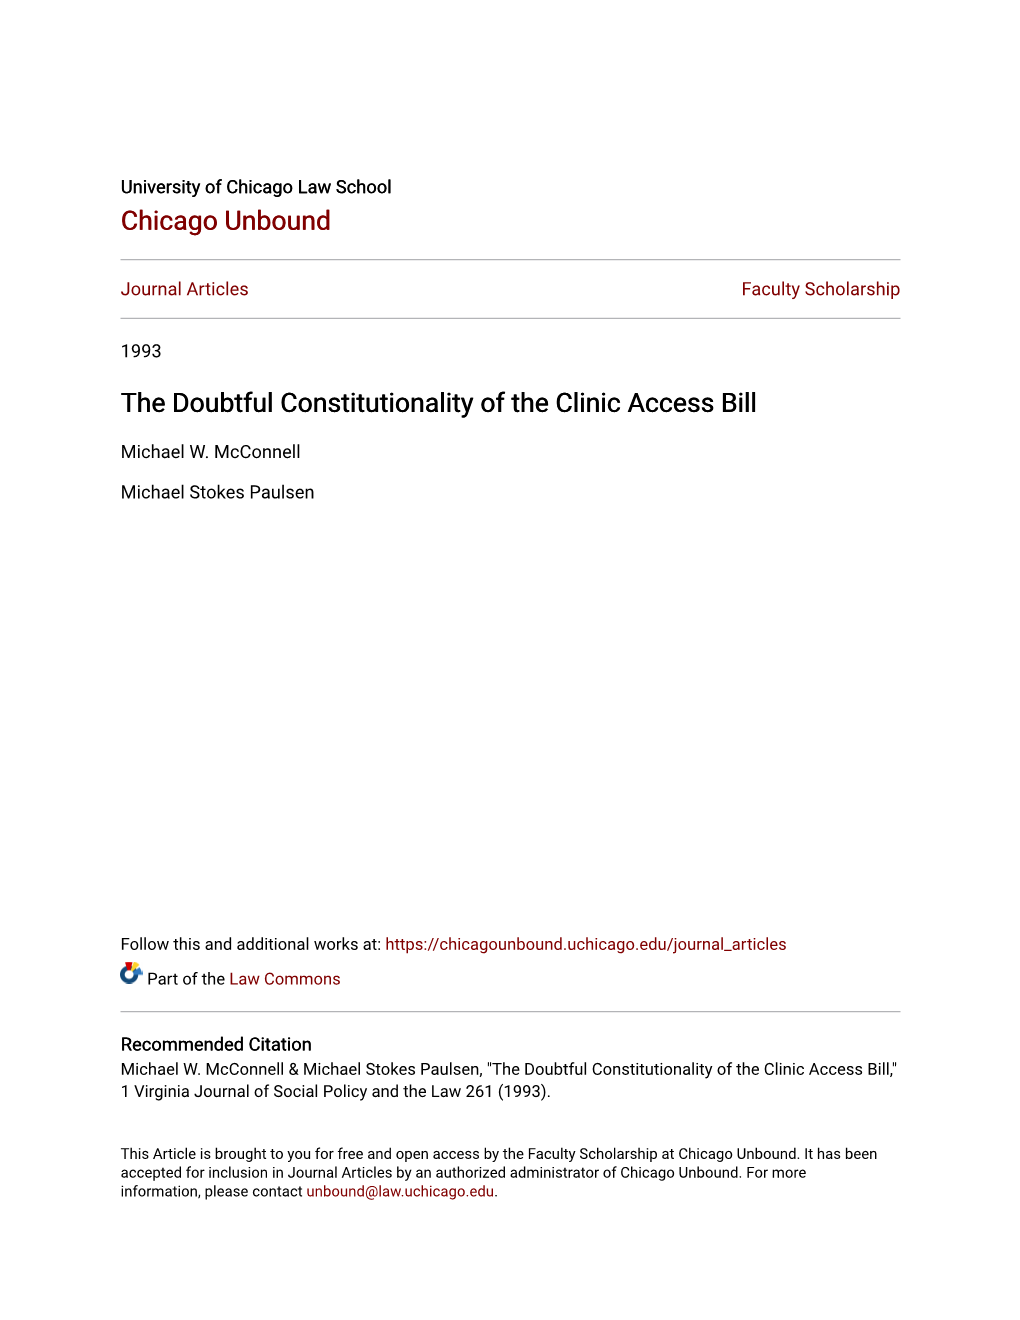 The Doubtful Constitutionality of the Clinic Access Bill